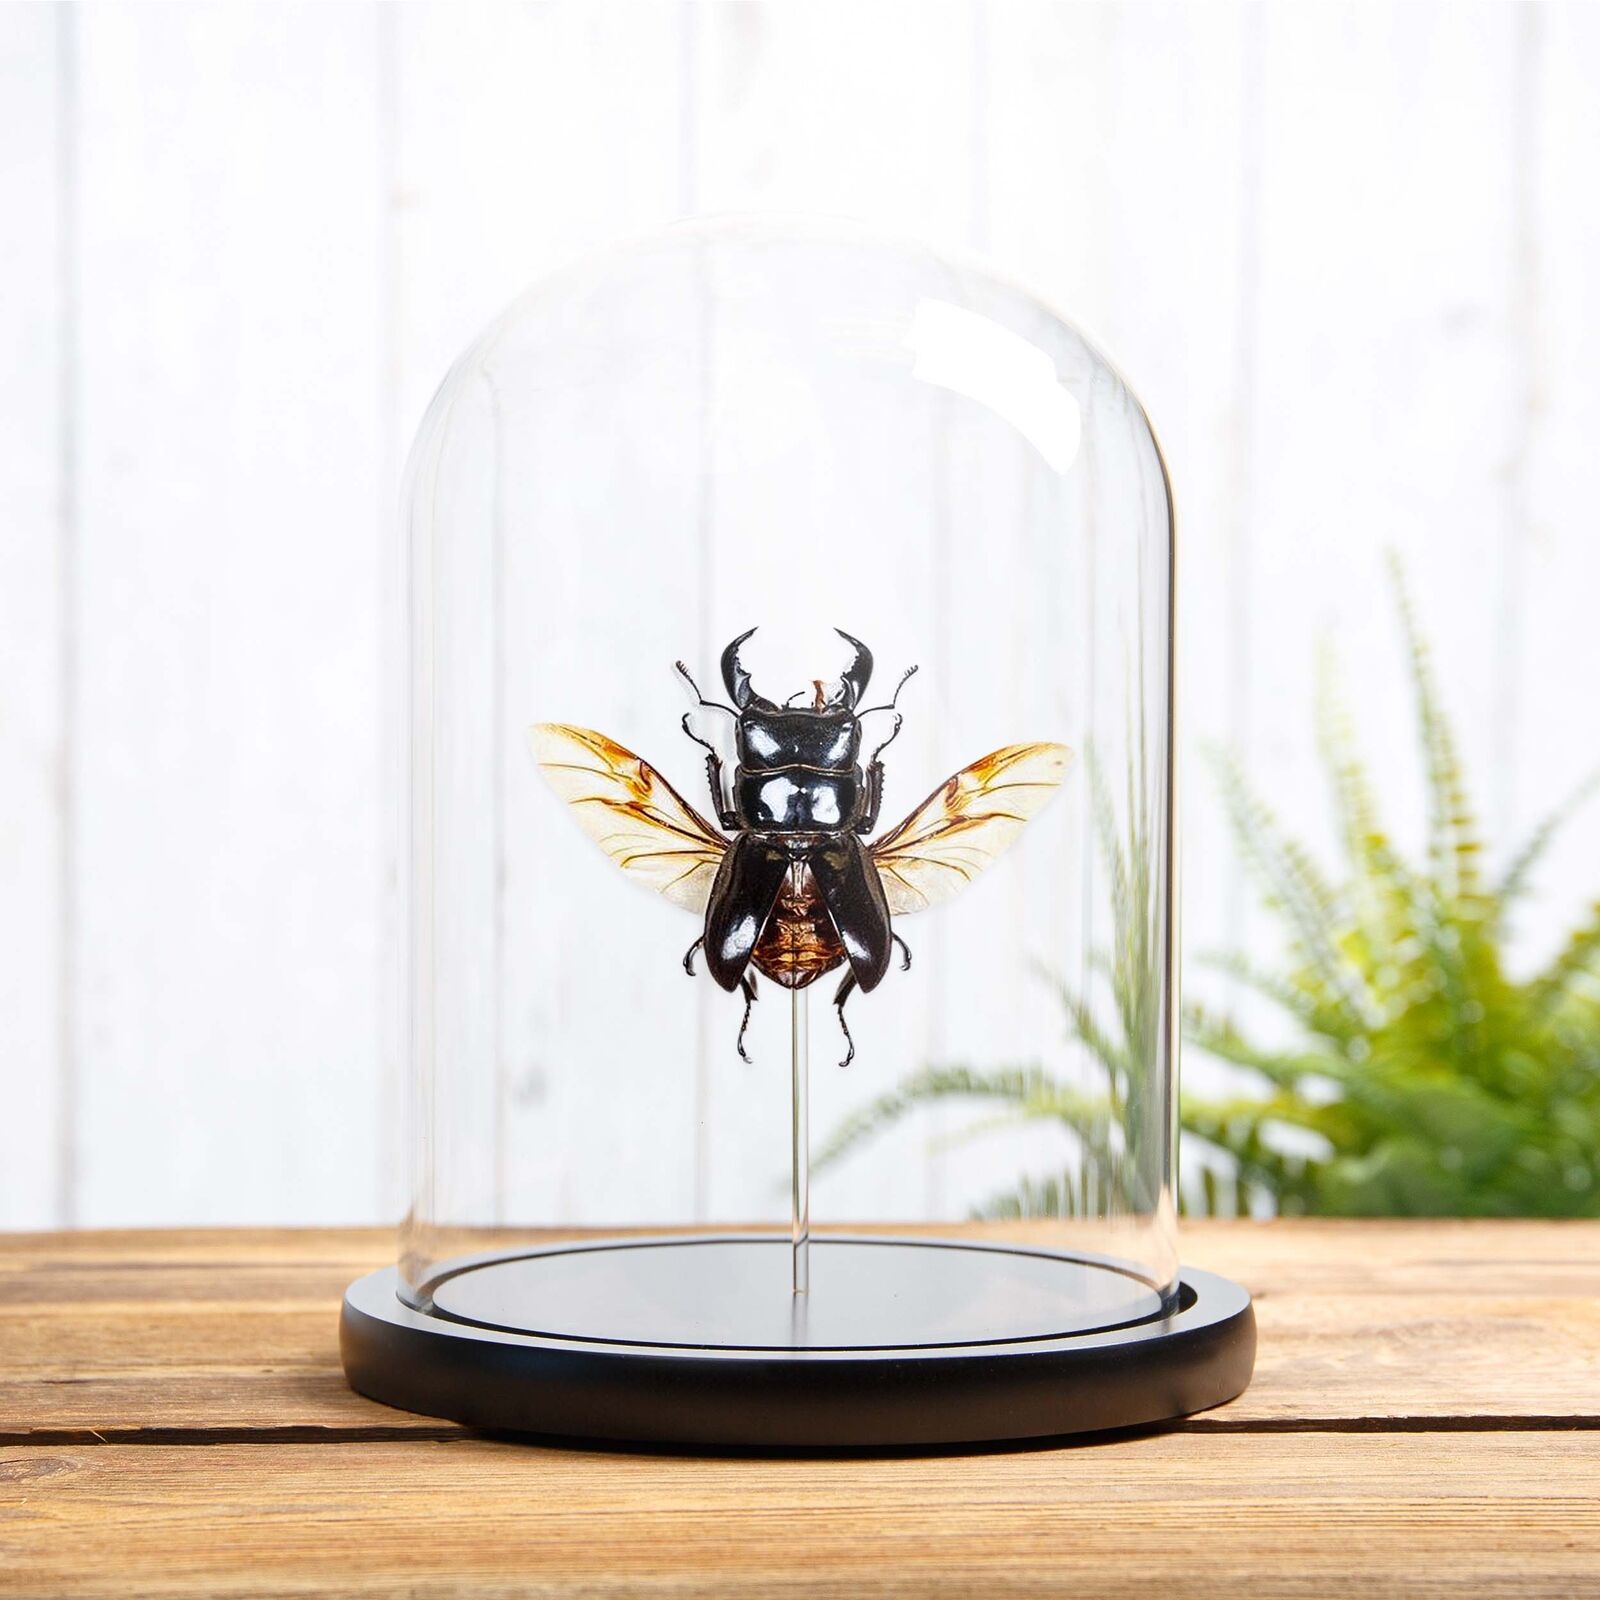 Wing-spread Giant Stag Taxidermy Beetle in Glass Dome (Dorcus titanus)